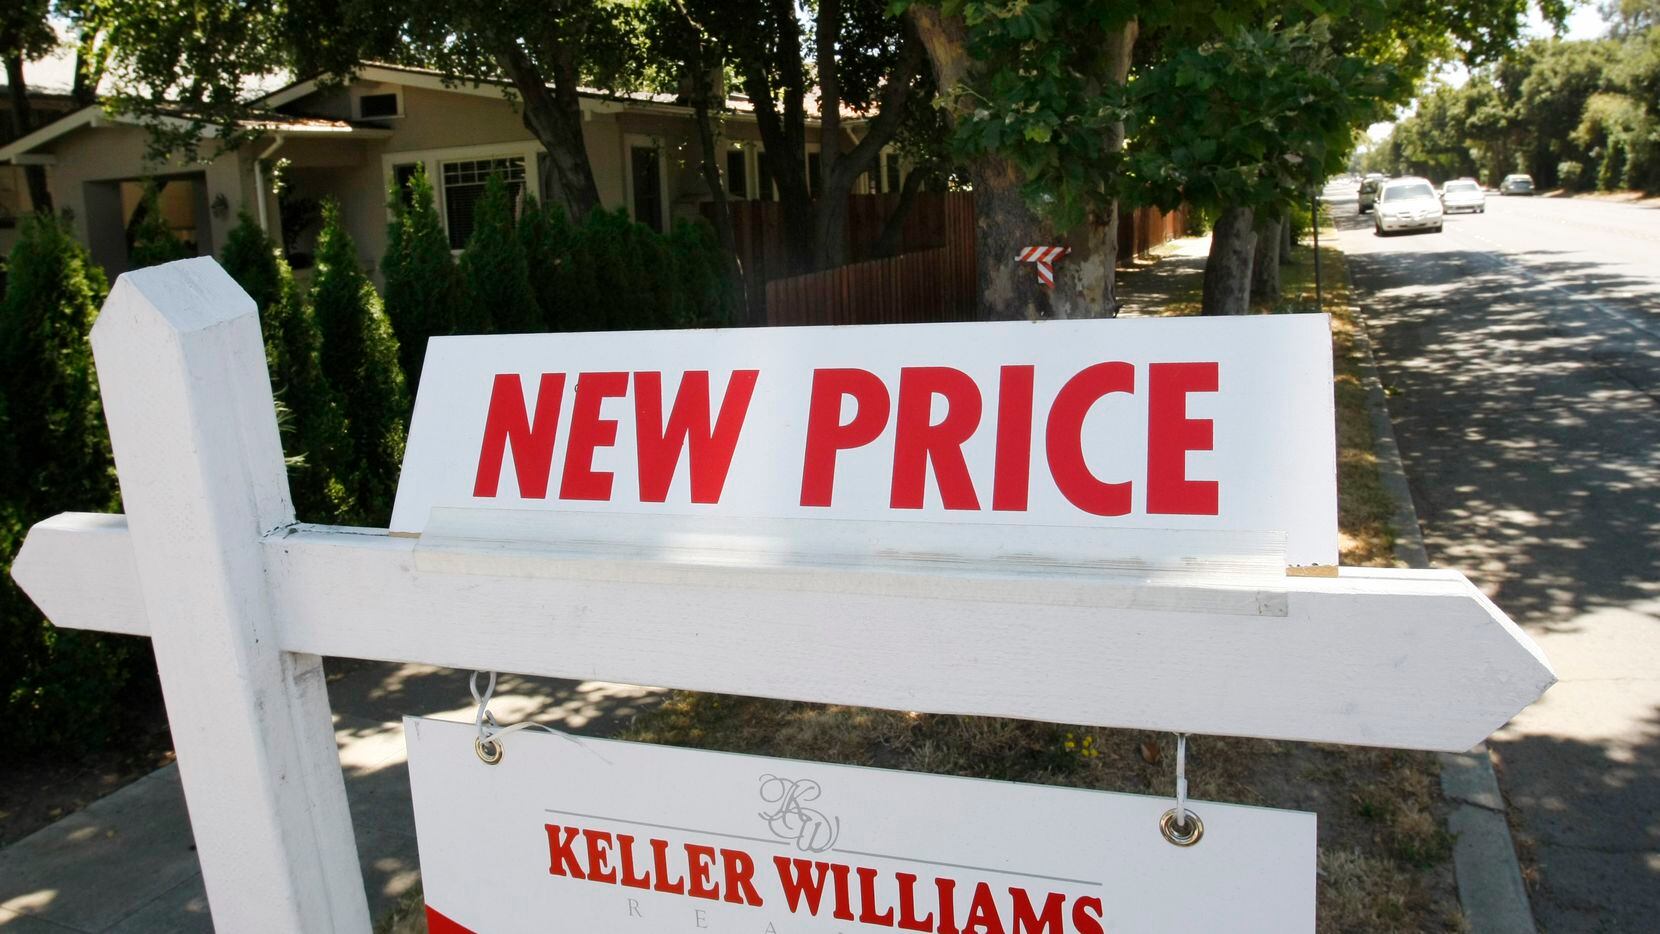 Nationwide home prices rose 5.8 percent in February from a year earlier.